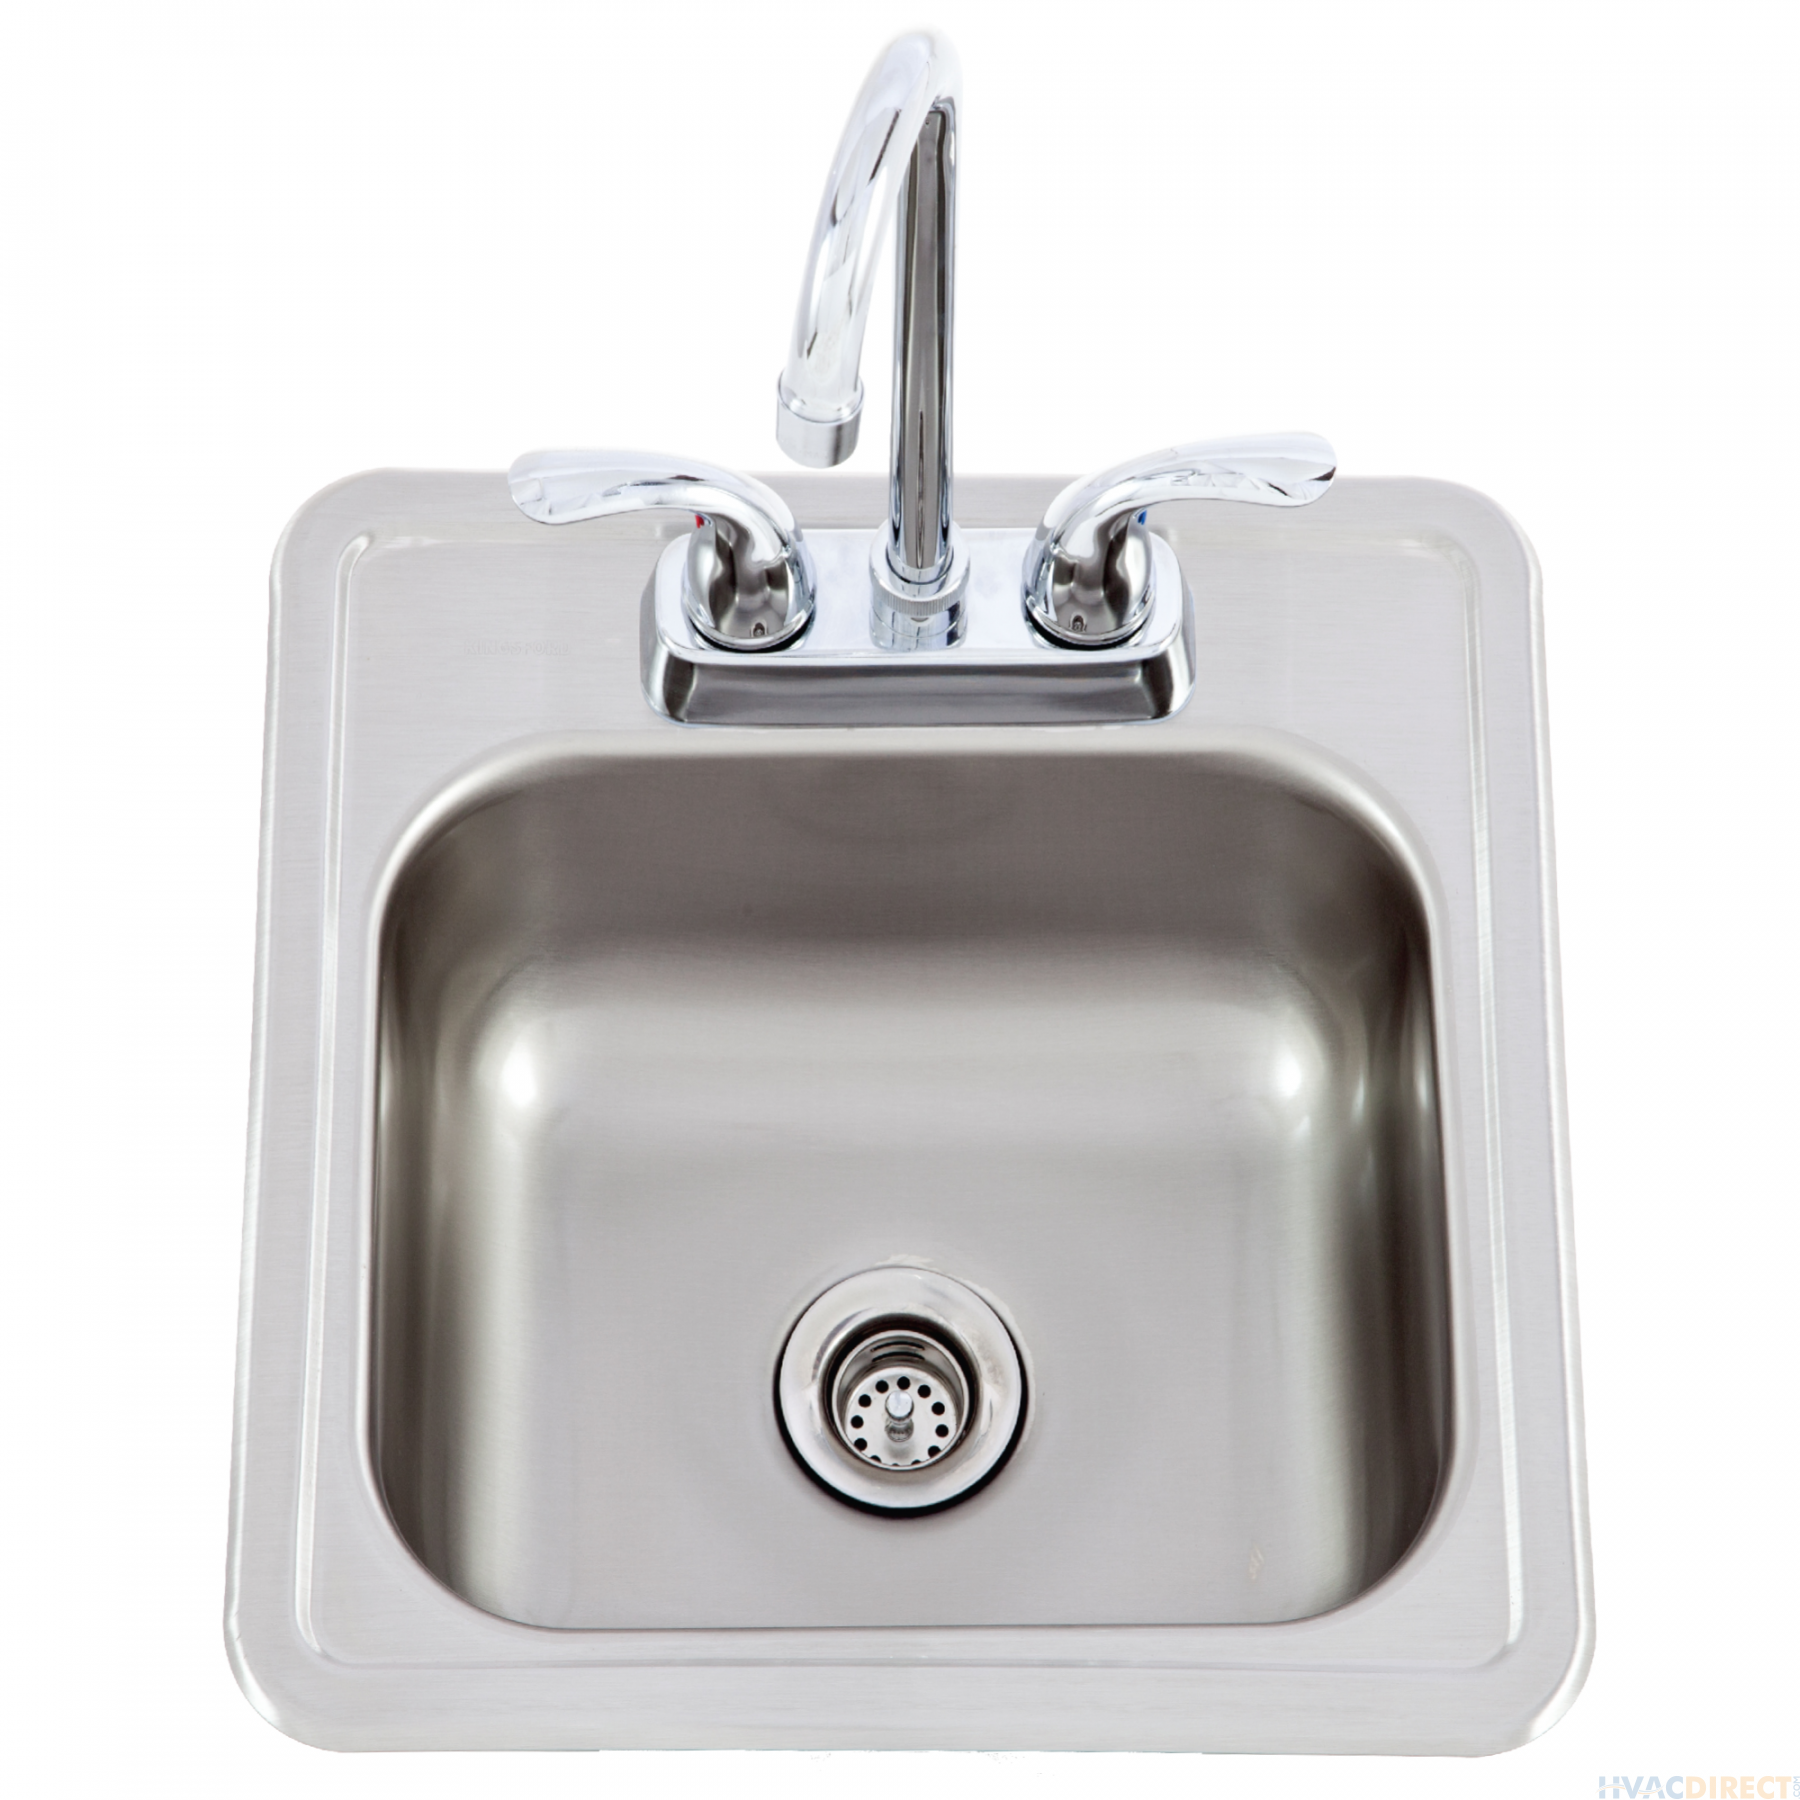 Lion 15 X 15 Outdoor Rated Stainless Steel Sink With Hot/Cold Faucet